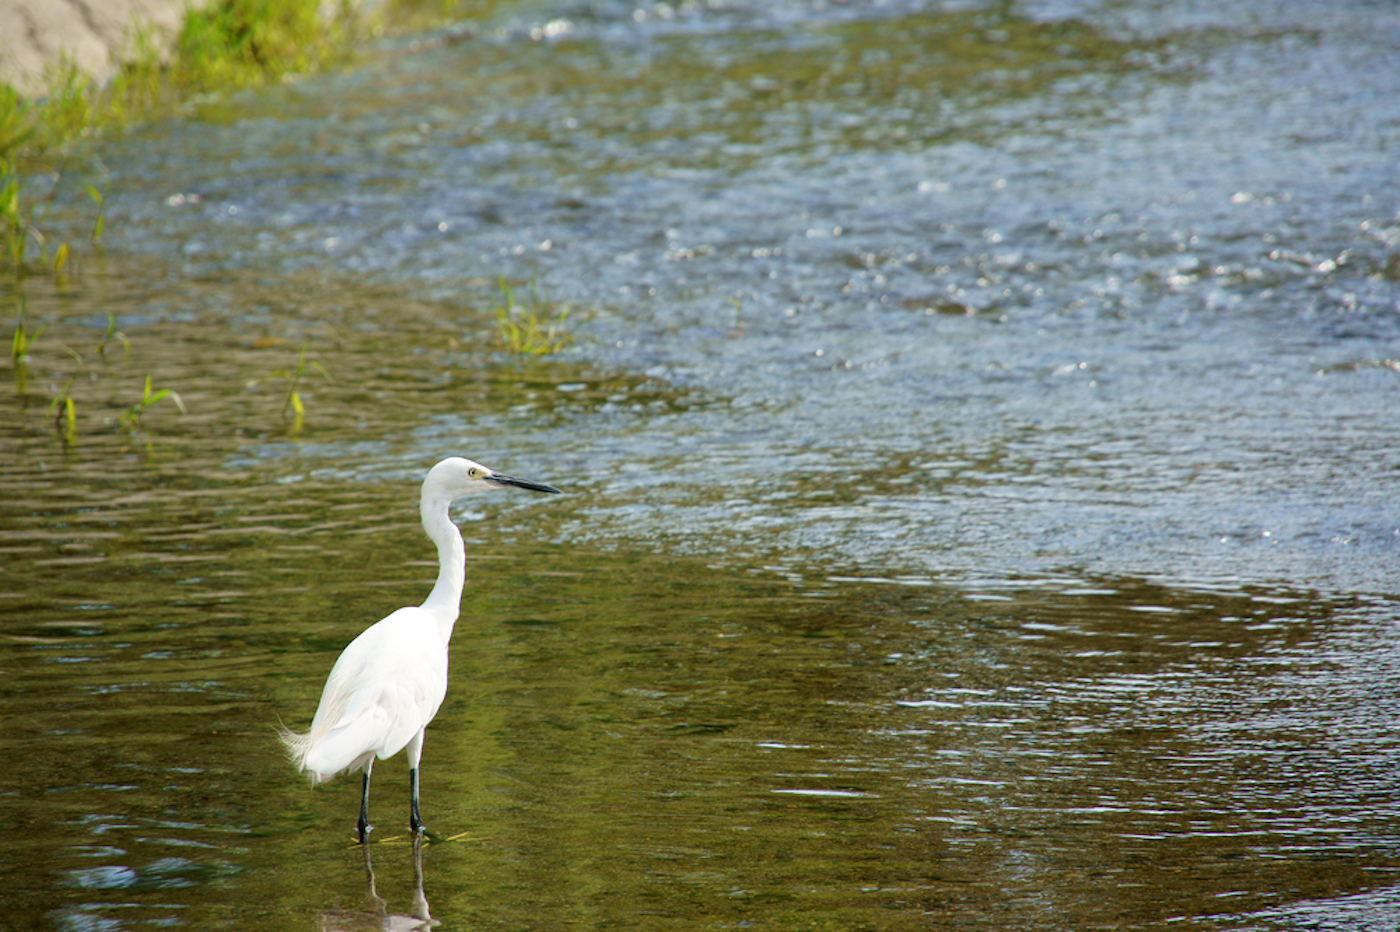 Egret standing on a grassy shore